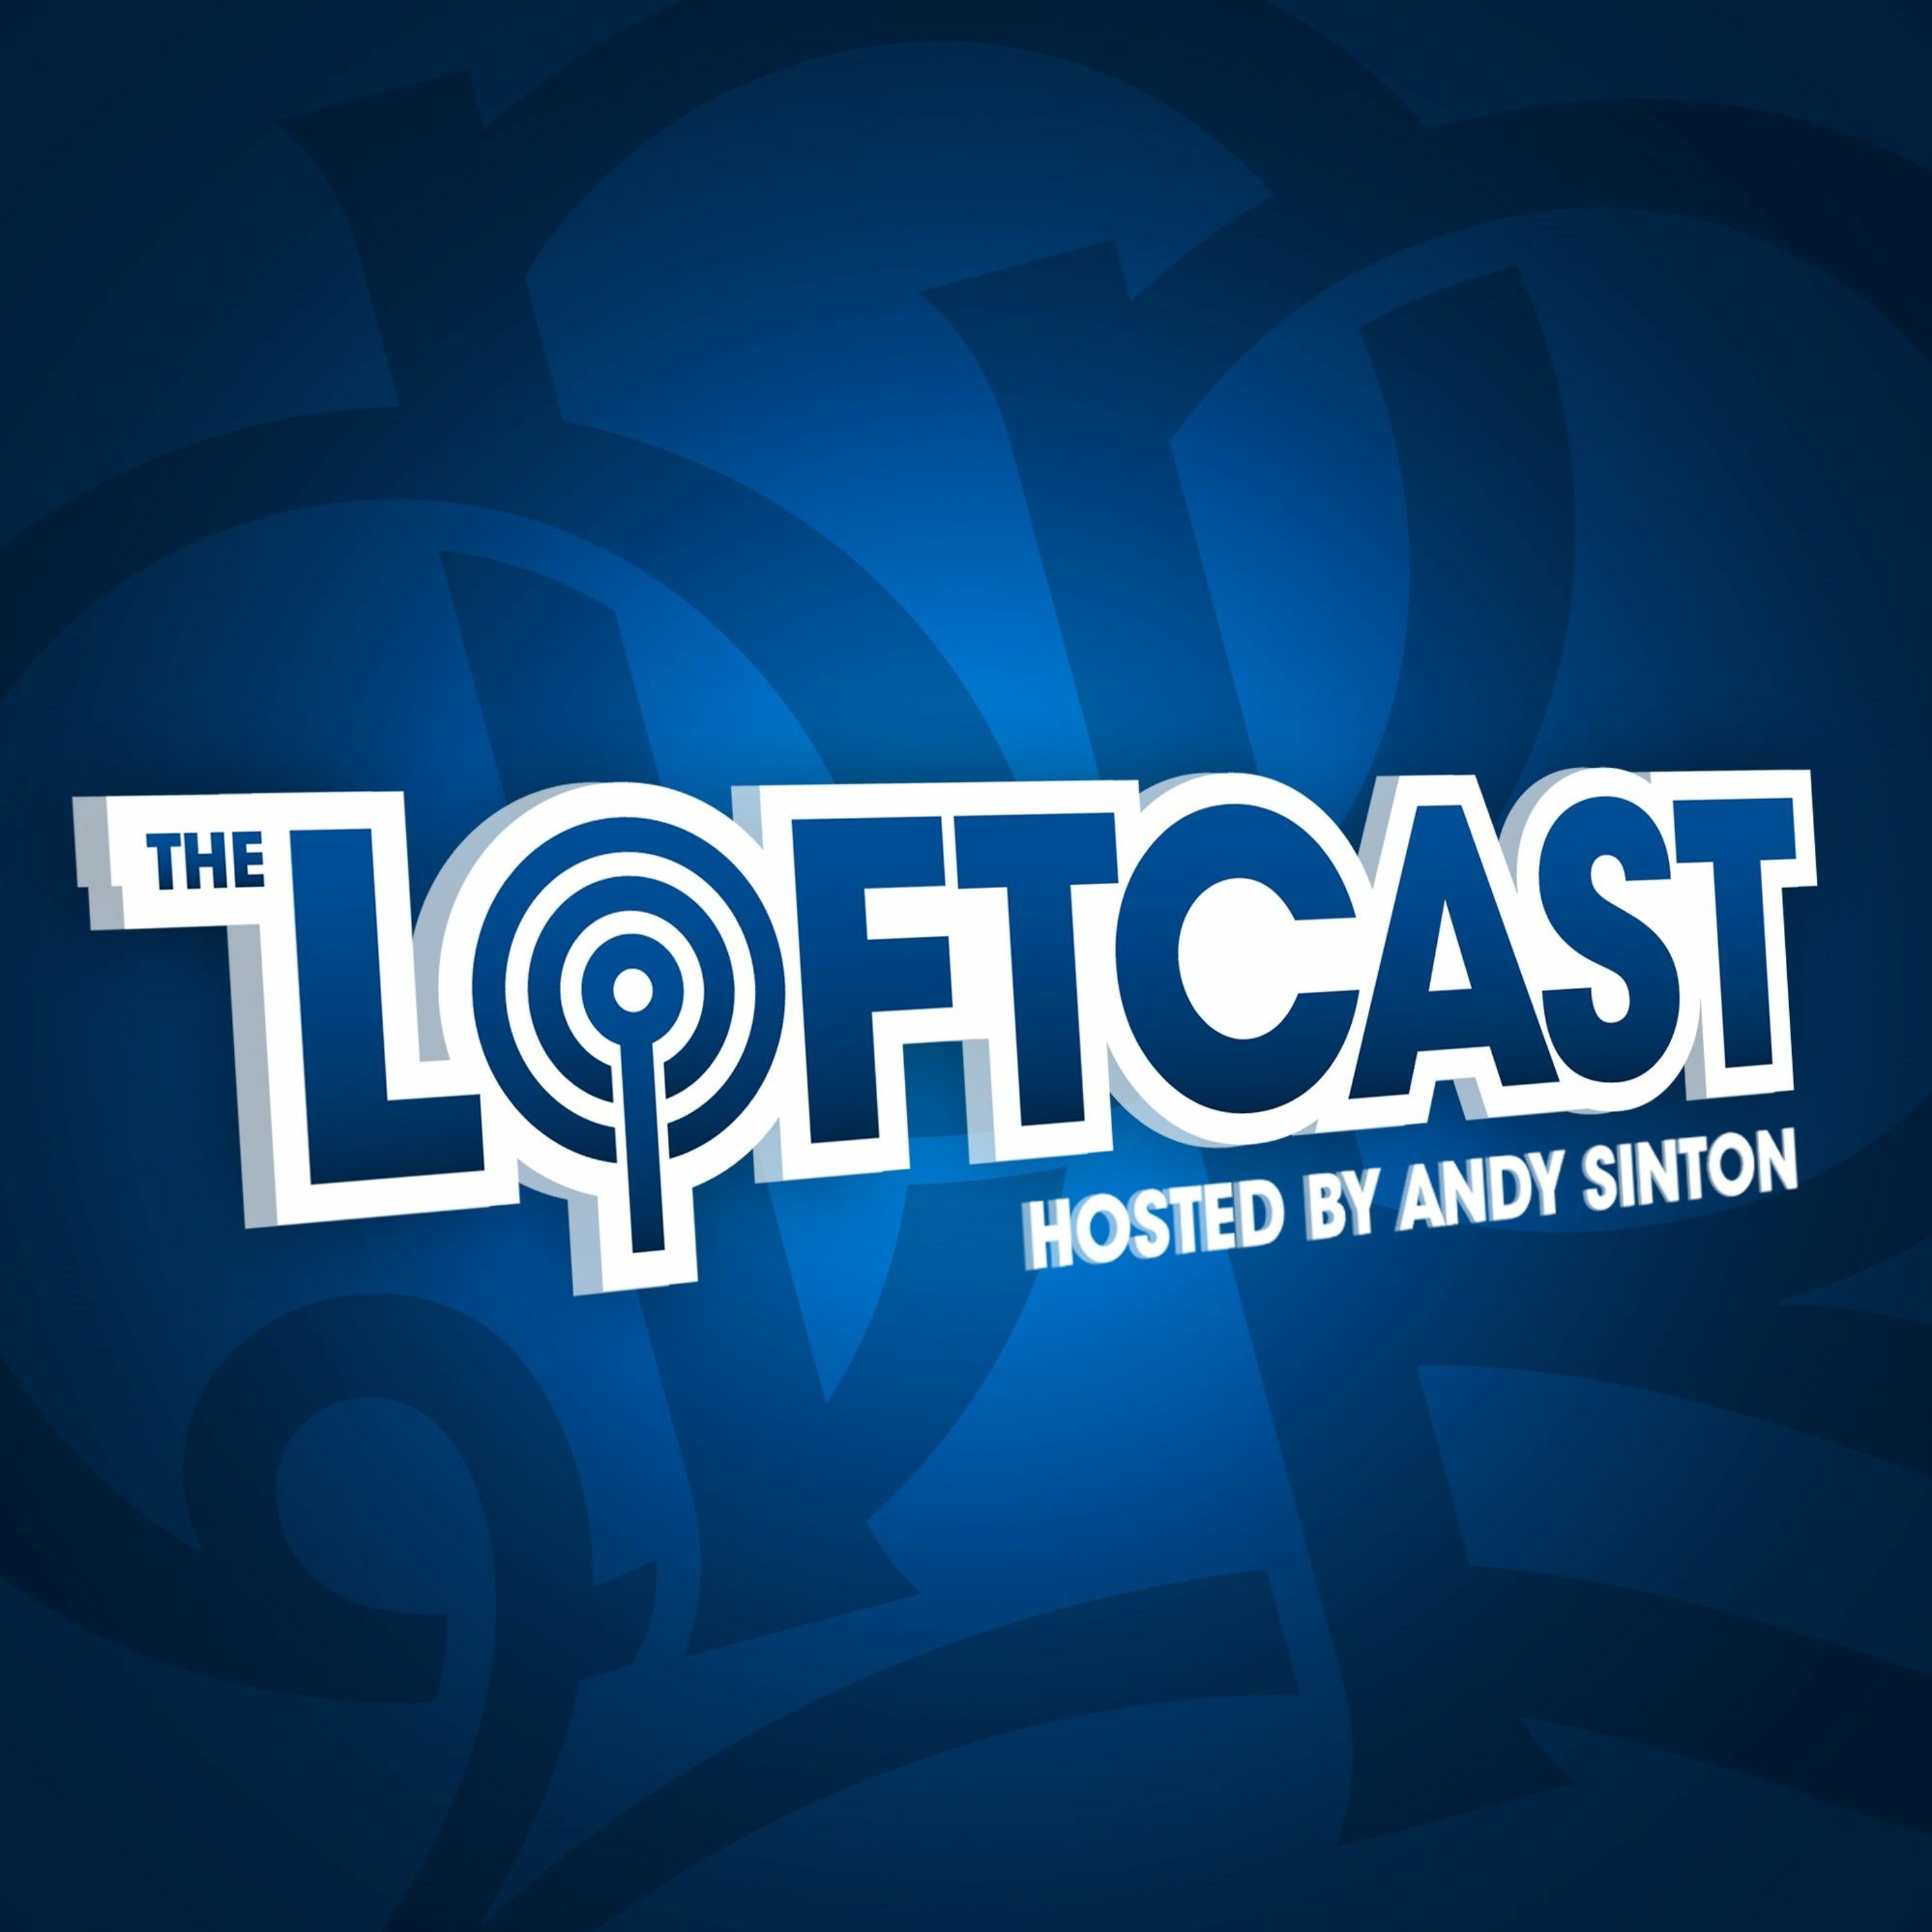 The Loftcast: Lockdown lifted